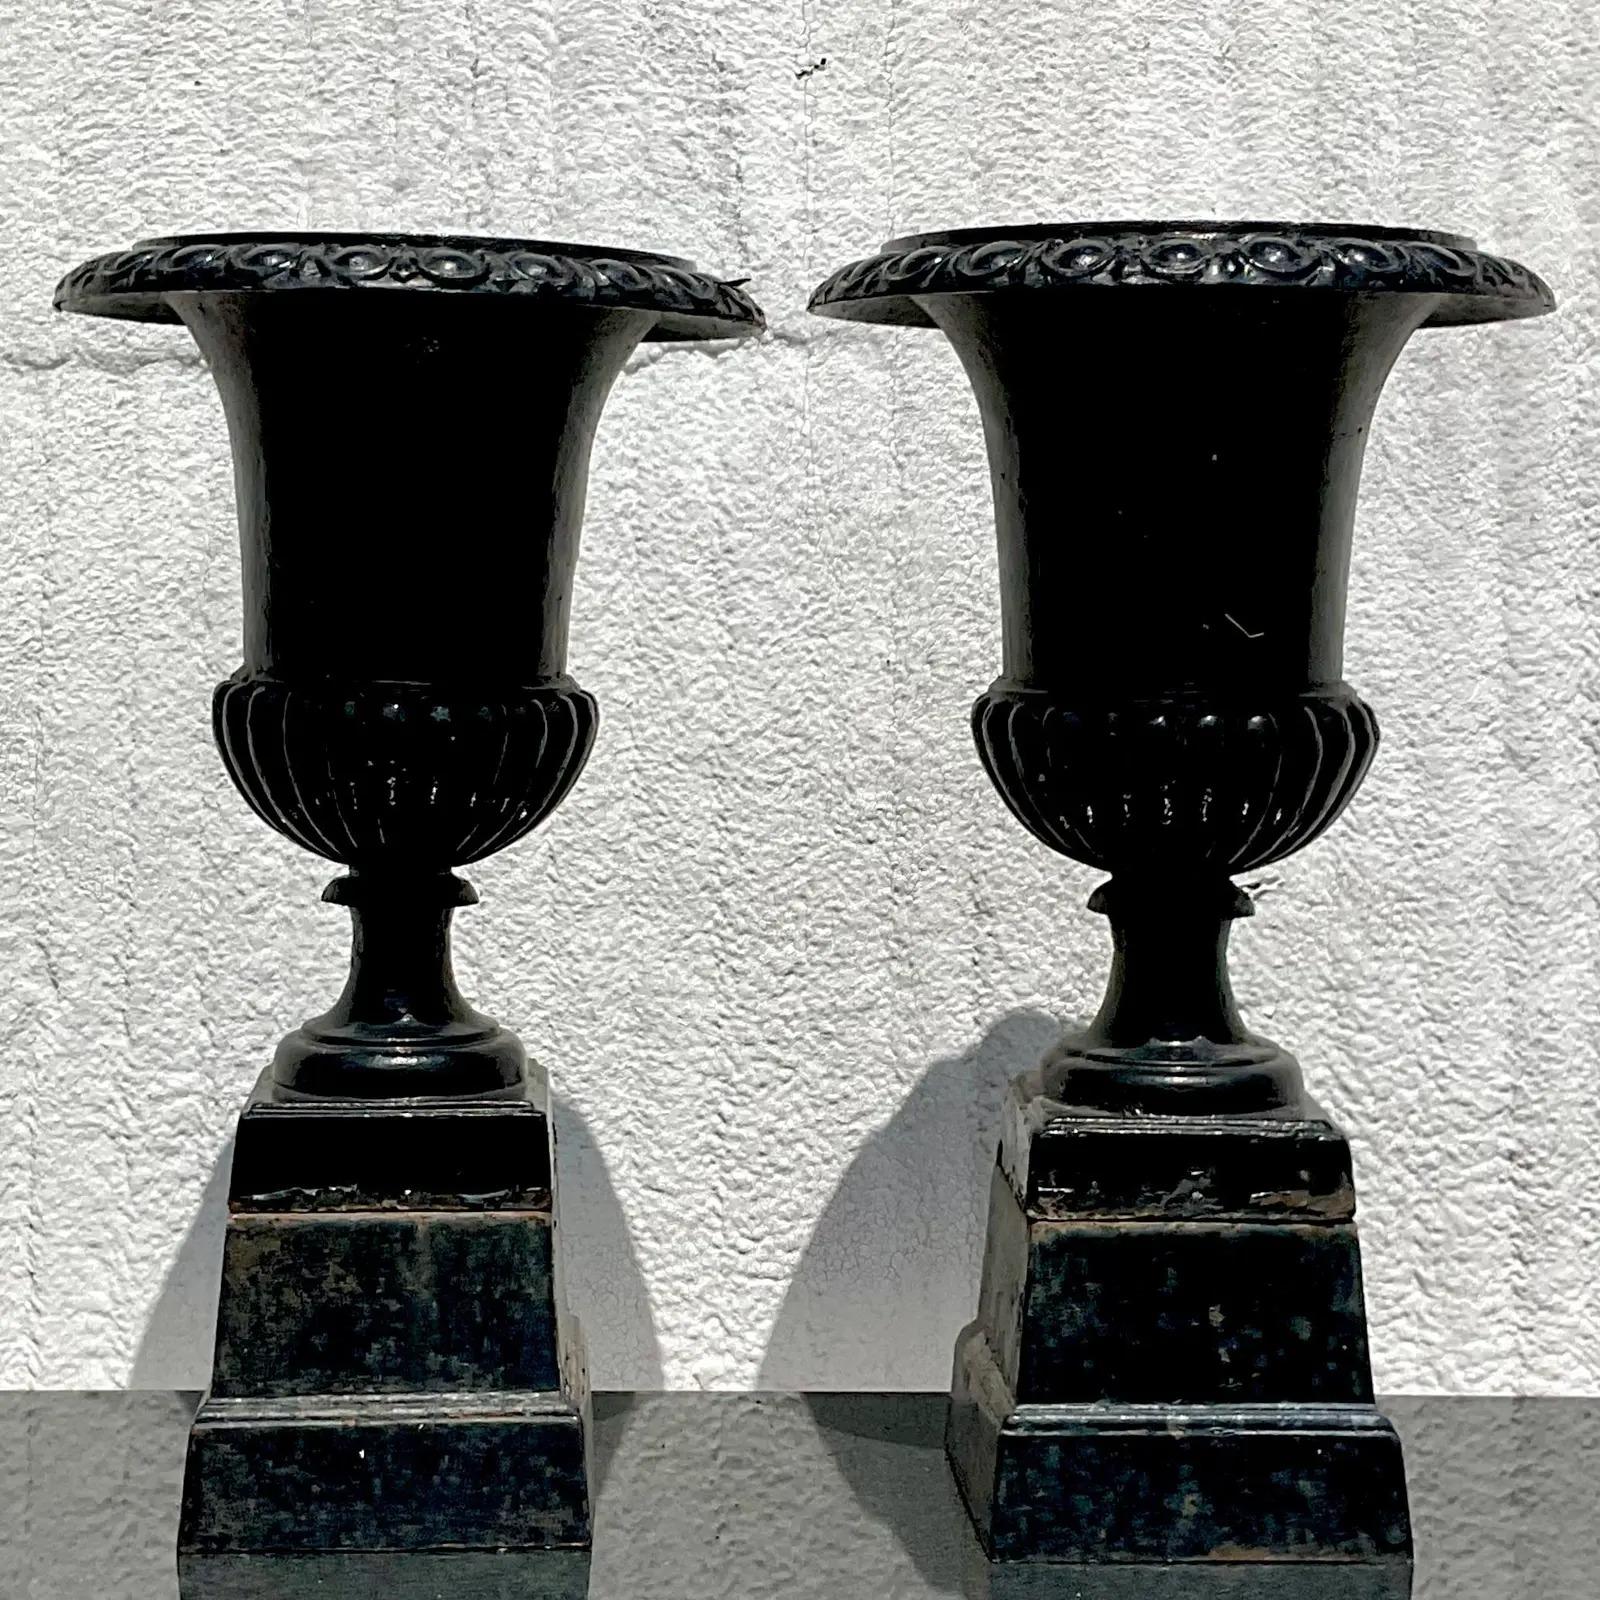 North American Vintage Regency Wrought Iron Urns, a Pair